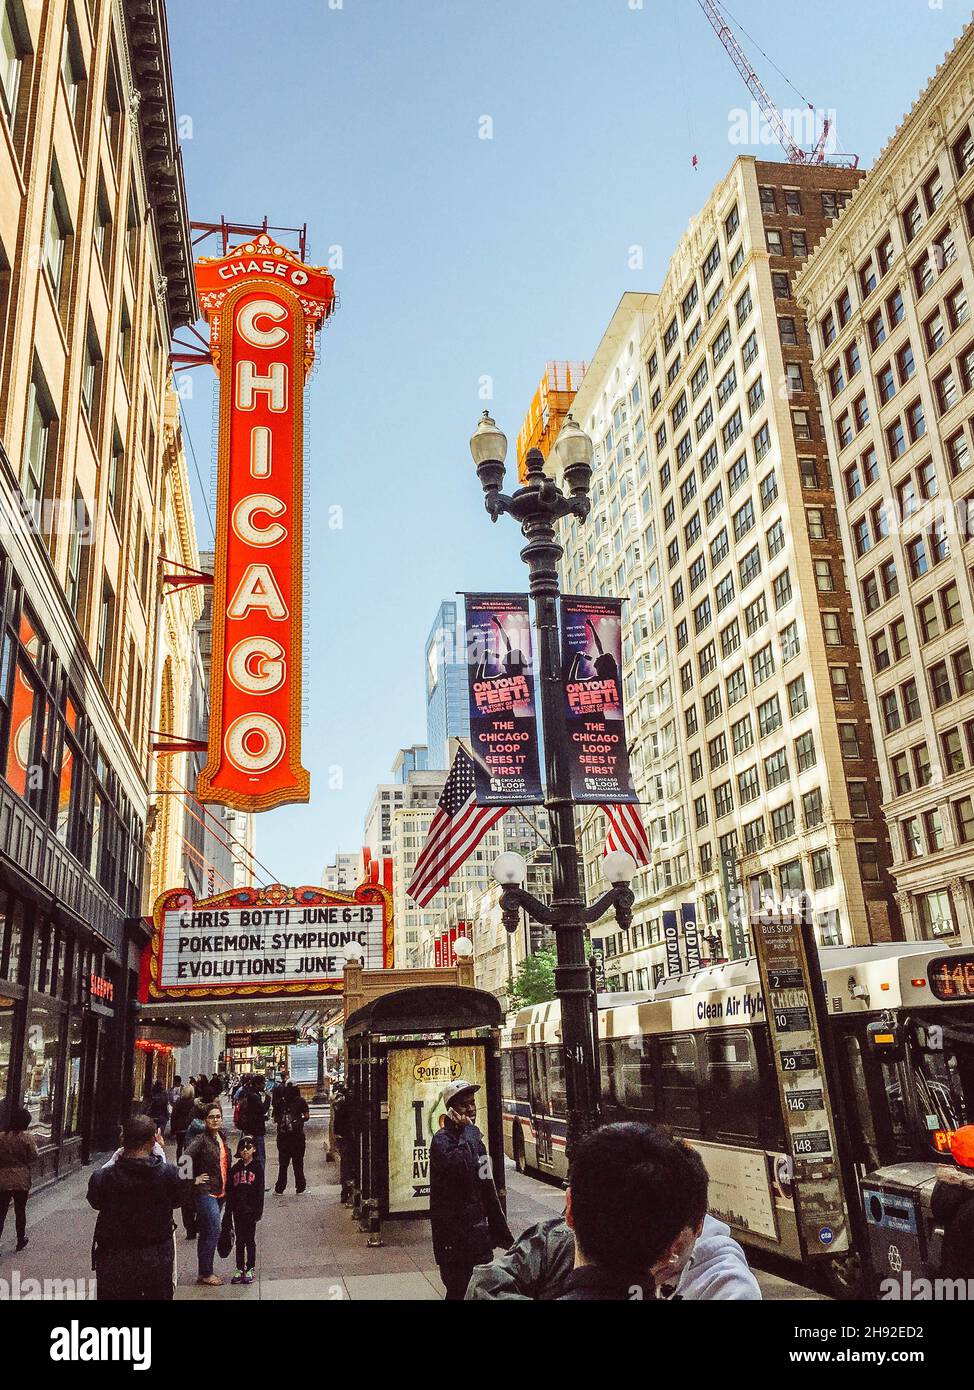 The Chicago Theatre, originally known as the Balaban and Katz Chicago Theatre, is a landmark theatre located on North State Street in the Loop area. Stock Photo